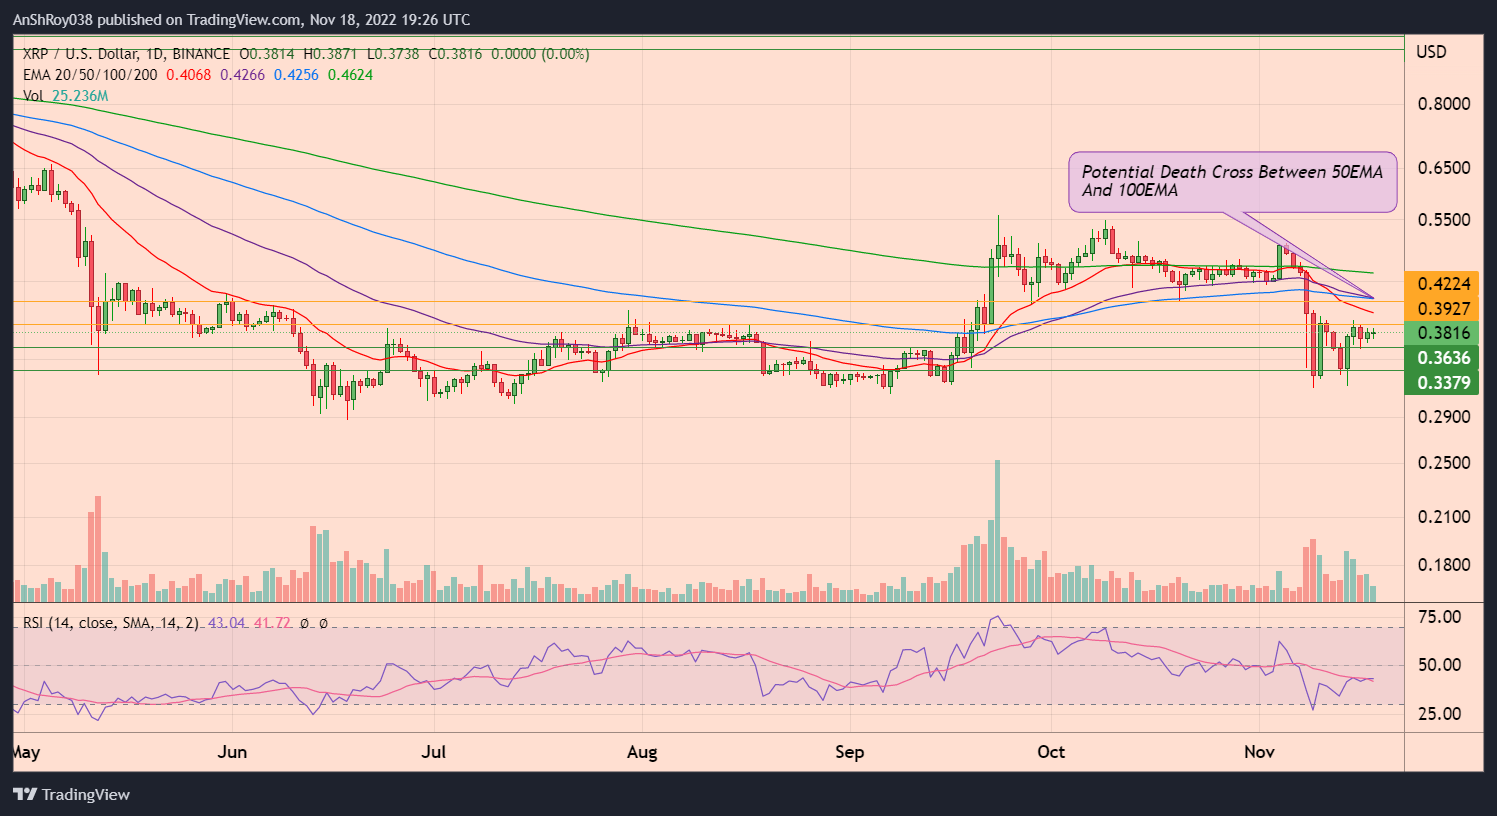 XRPUSD daily chart with RSI and potential death cross